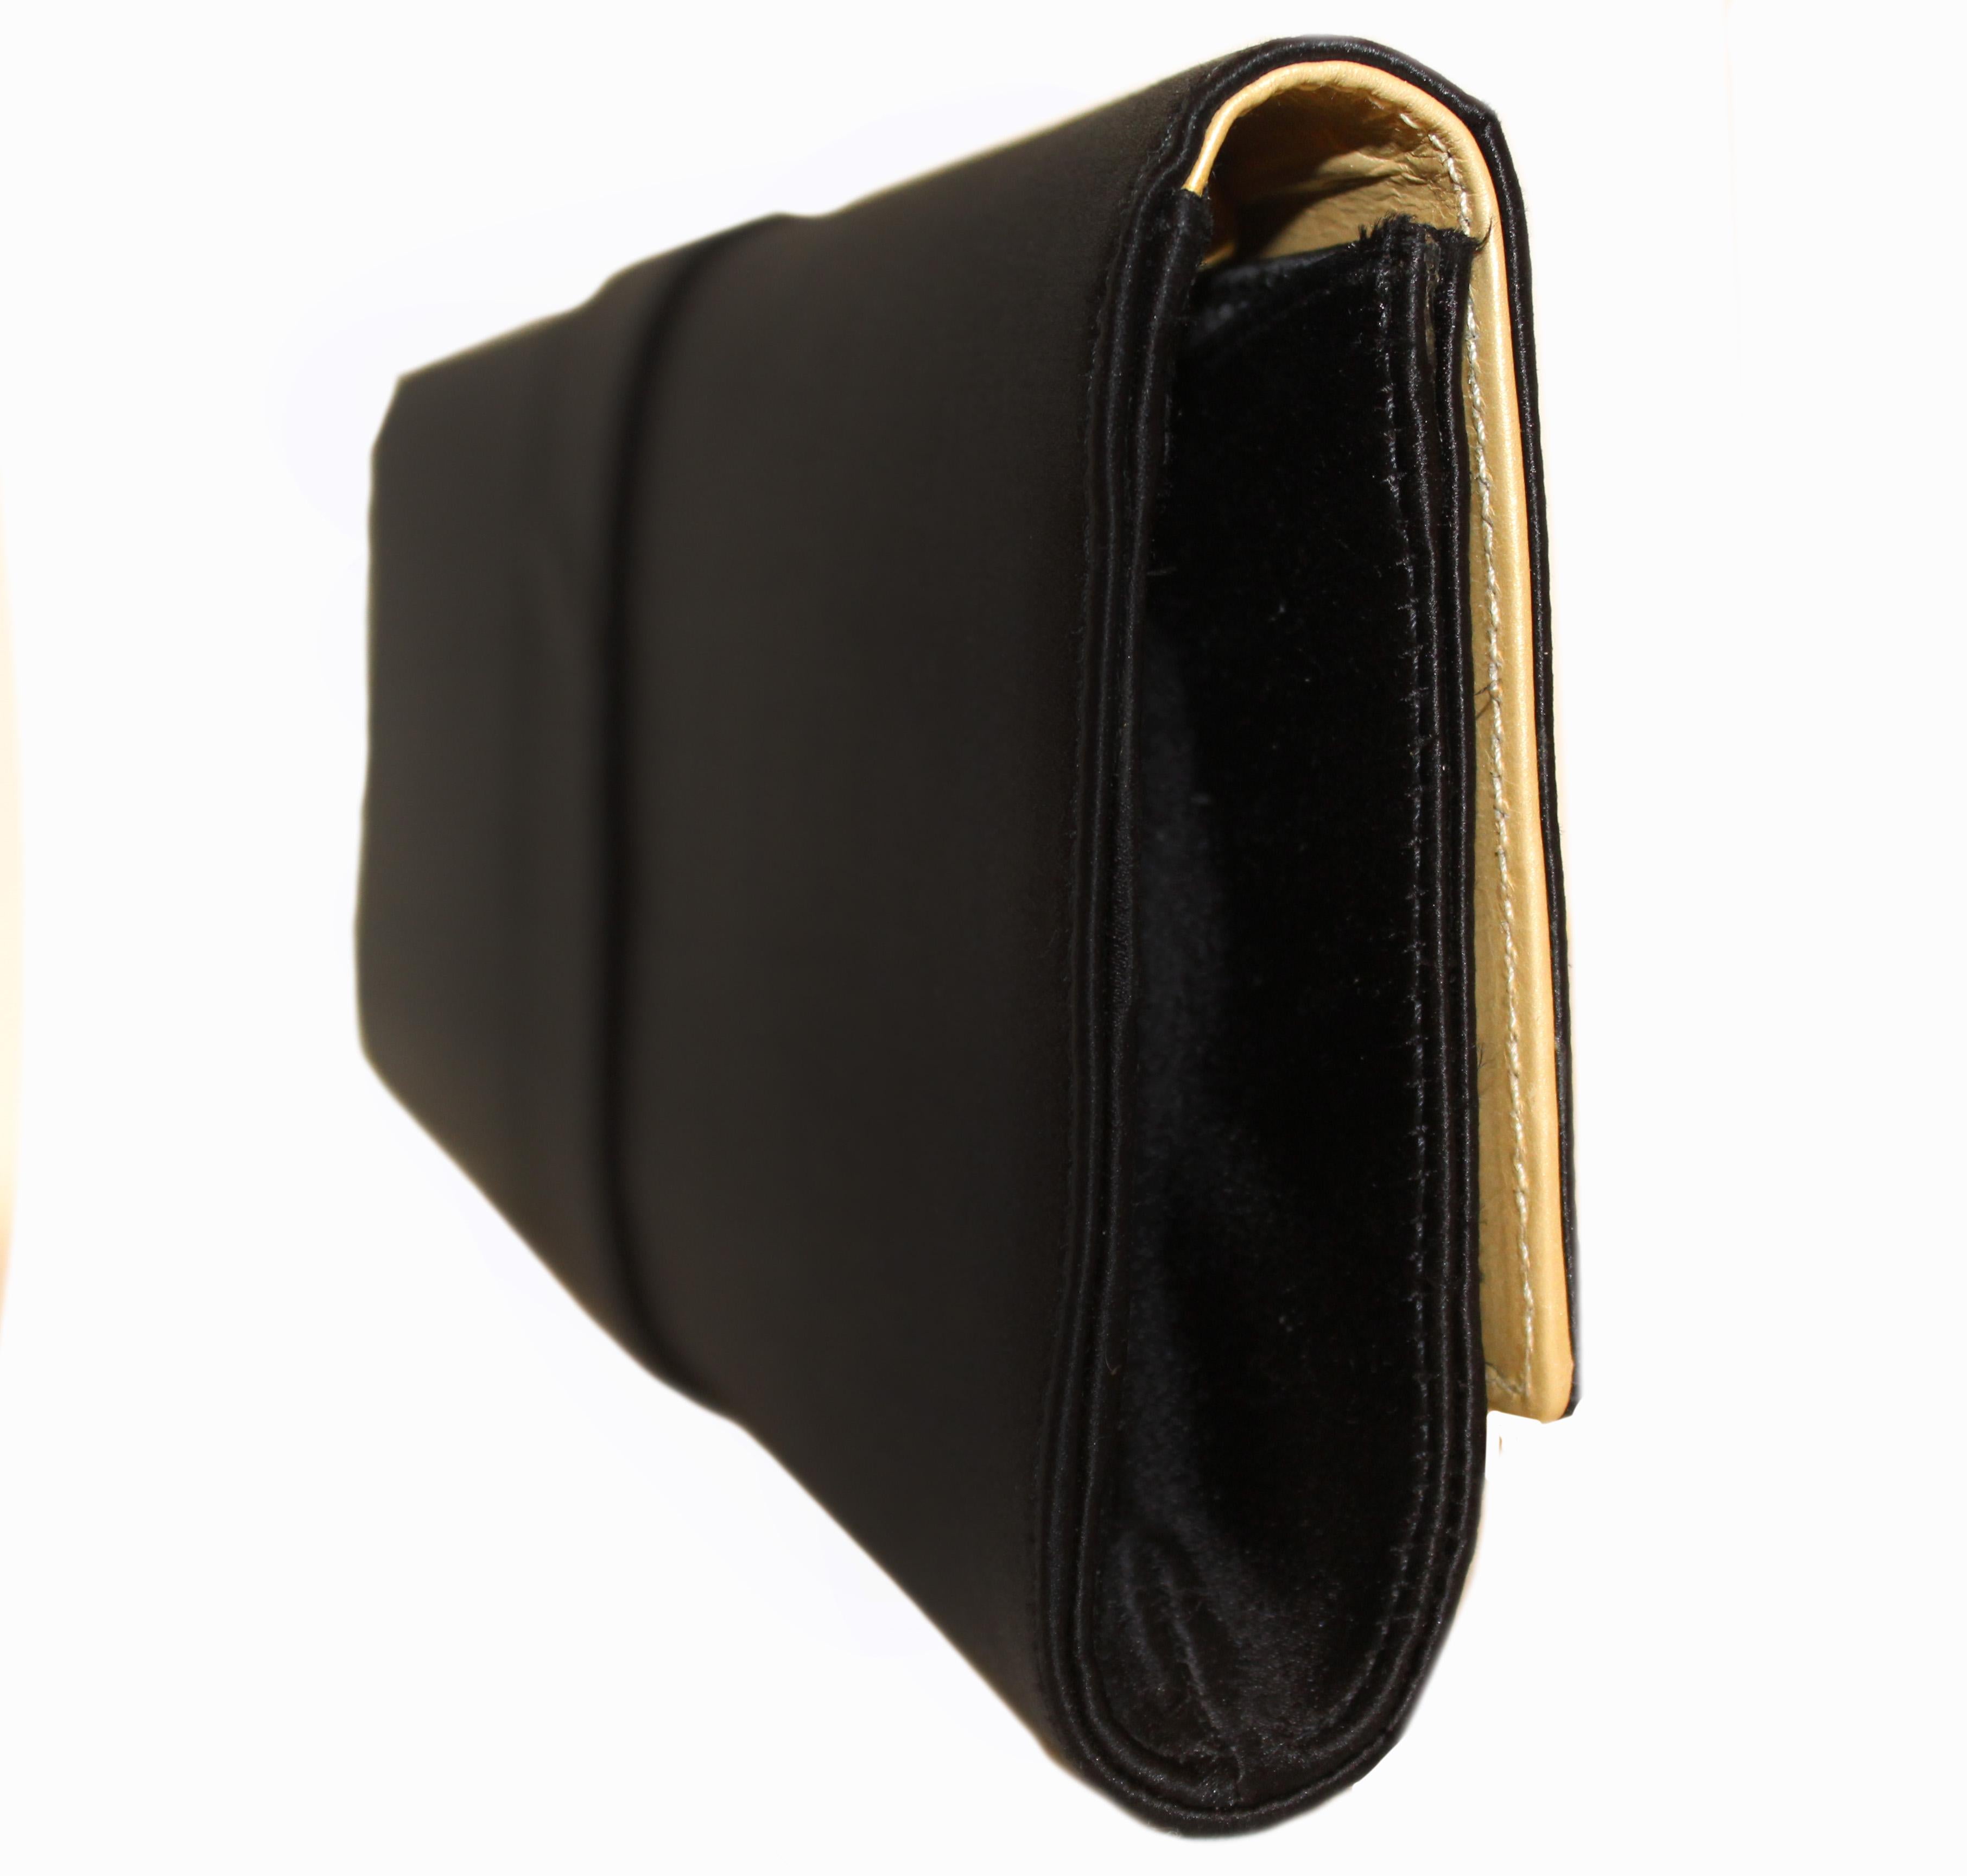 Roberto Cavalli black satin clutch bag is a classic.  Presenting this black satin structured clutch from Roberto Cavalli featuring a gold-tone chain shoulder strap, a fold-over top with magnetic closure, a front snake  plaque, multiple interior